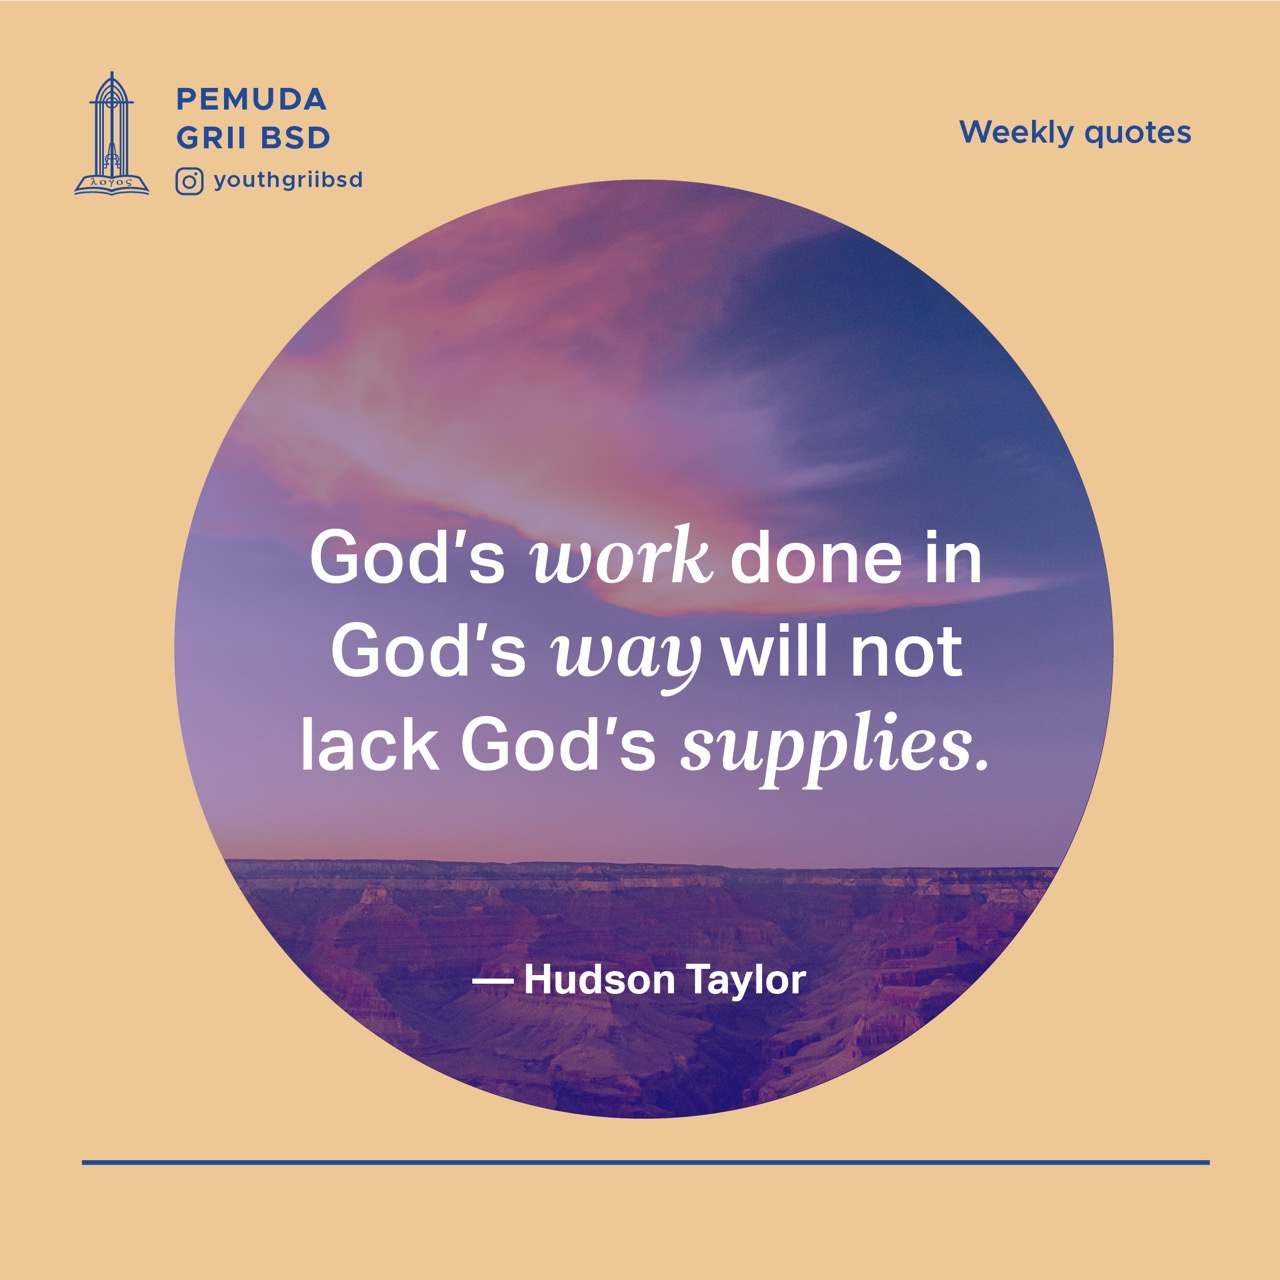 God's work done in God's way will not lack God's supplies.